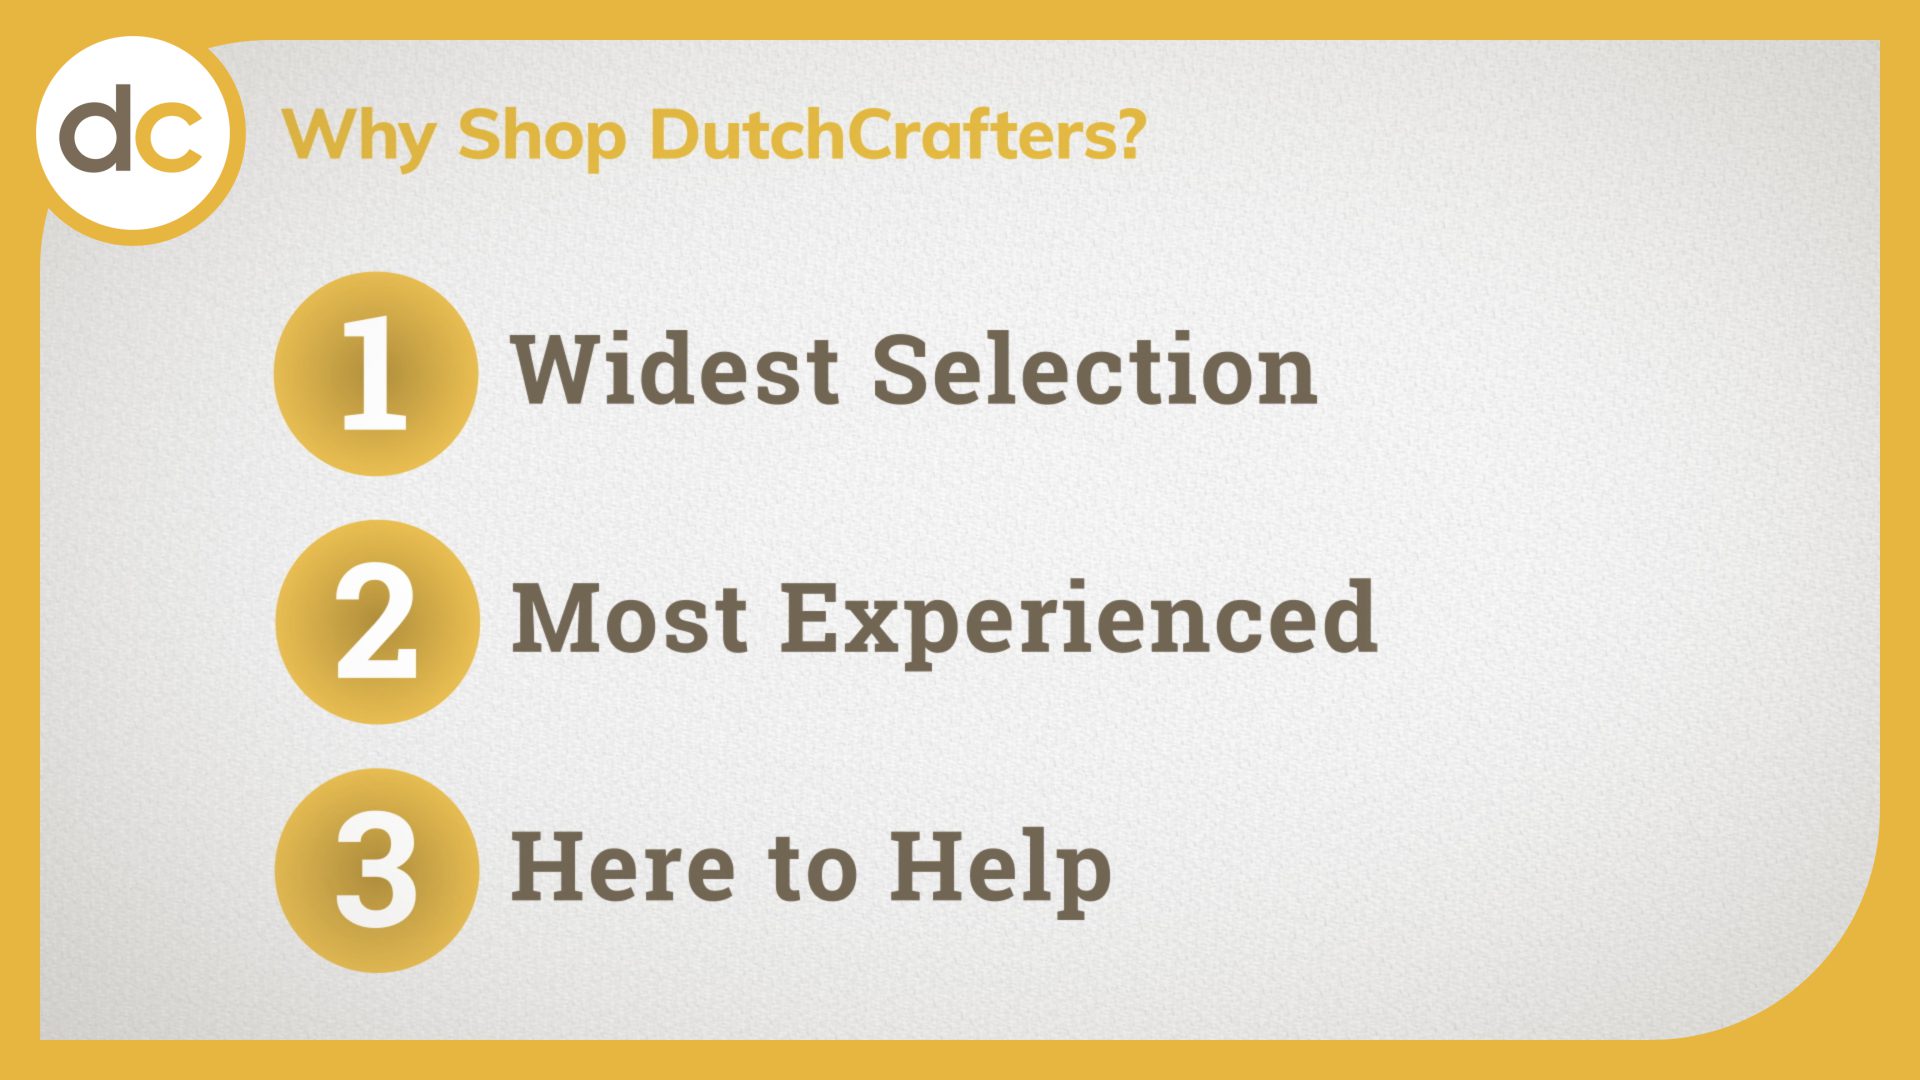 Image with title text, "Why Shop DutchCrafters? Widest Selection, Most Experienced, Here to Help"